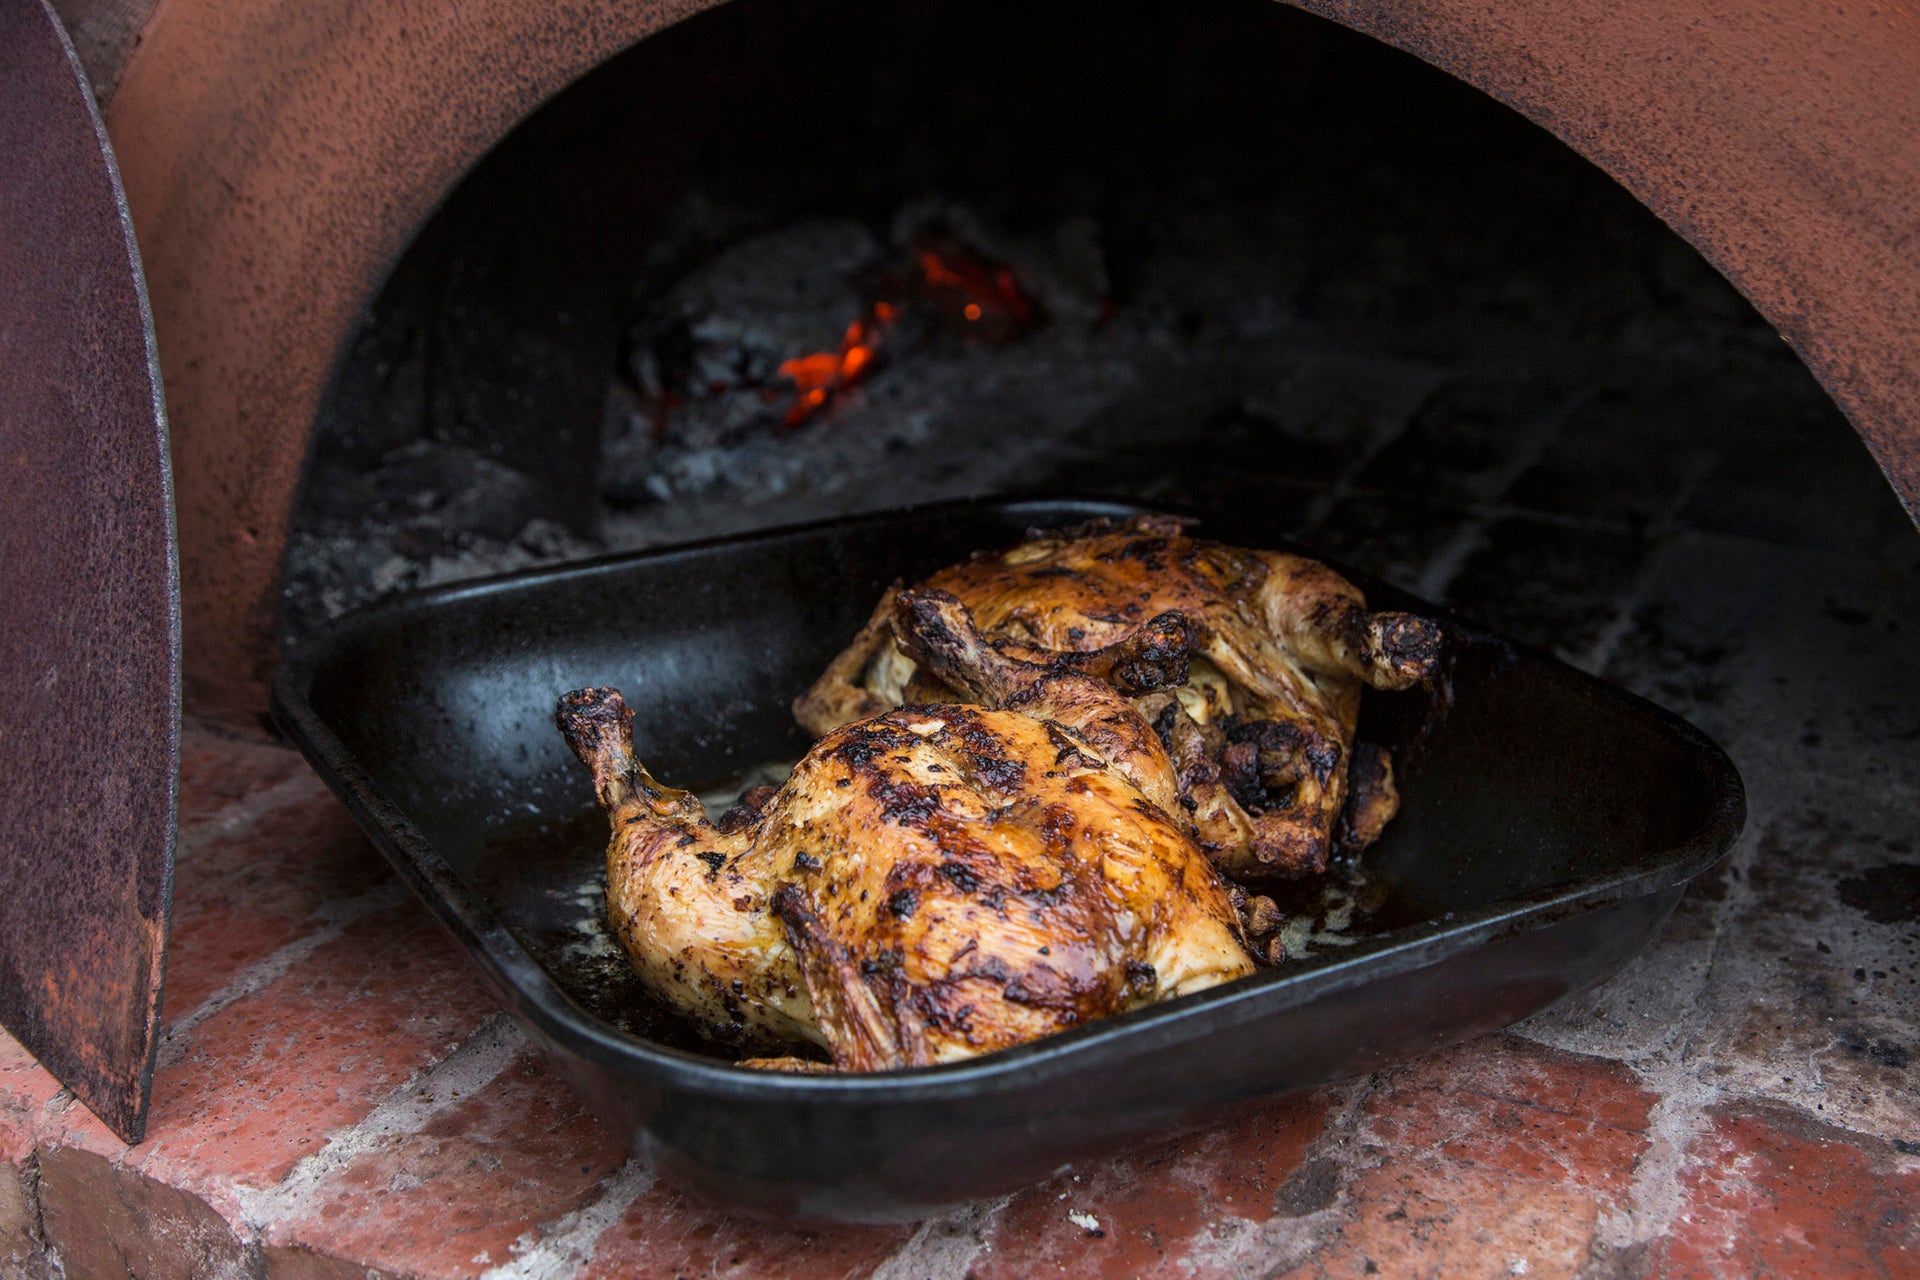 Chicken being roasted in a traditional brick oven / Getty